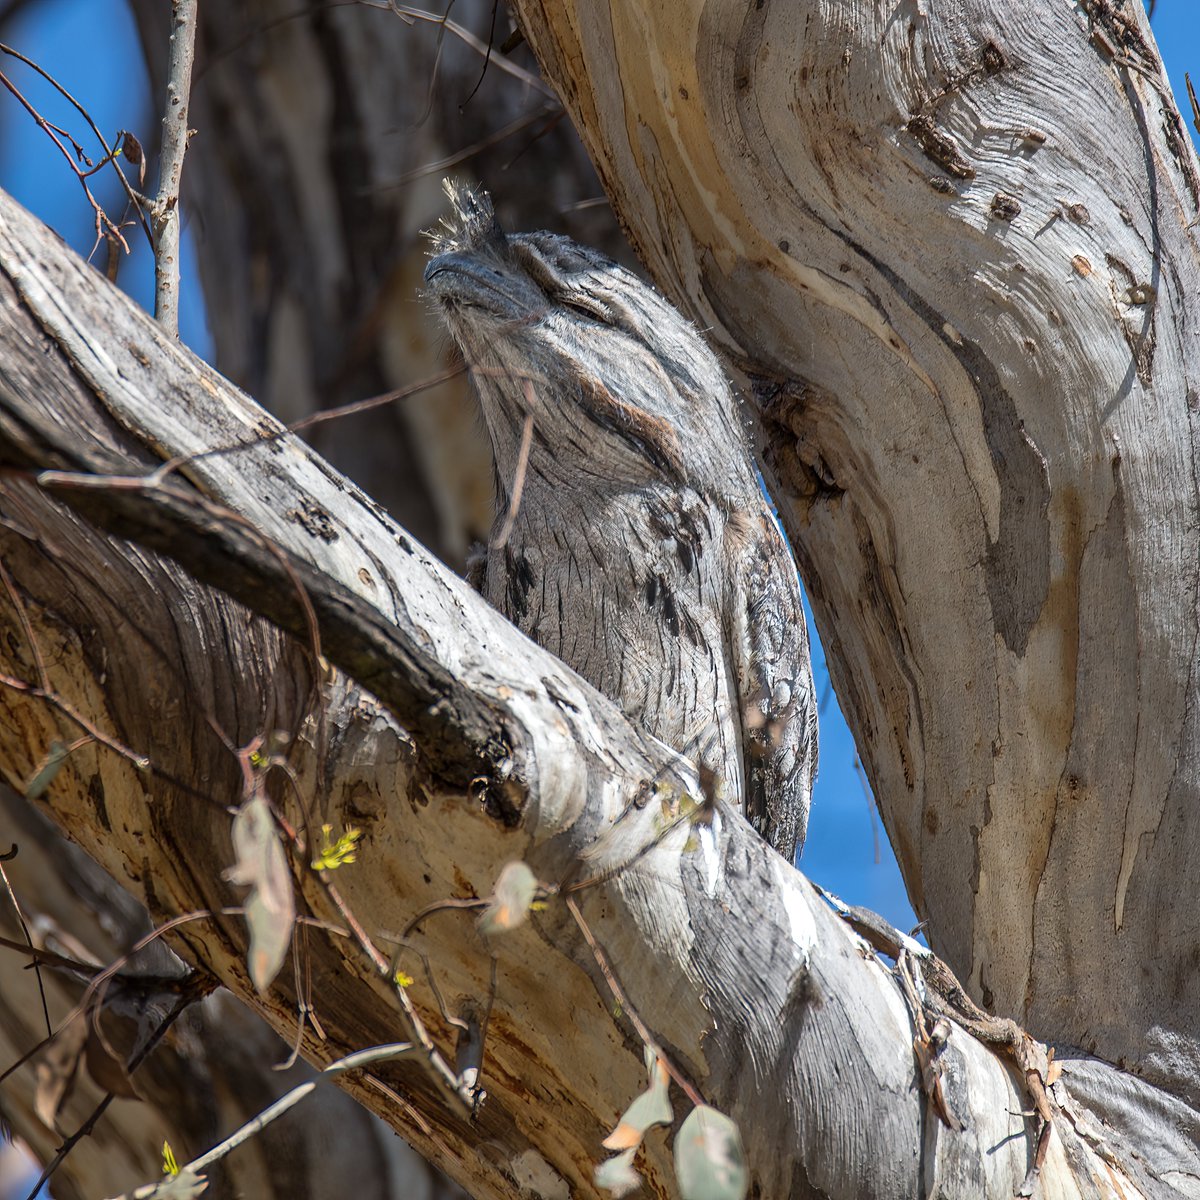 Pictures from @MulligansFlat over the last couple of days - Smug Kookaburra; Leopard Orchid; Rabbits (in the Reserve but not the Sanctuary); and a Tawny Frogmouth. @KMRiethmiller @CraigAllenCBR @GbhvfRon @wapple15